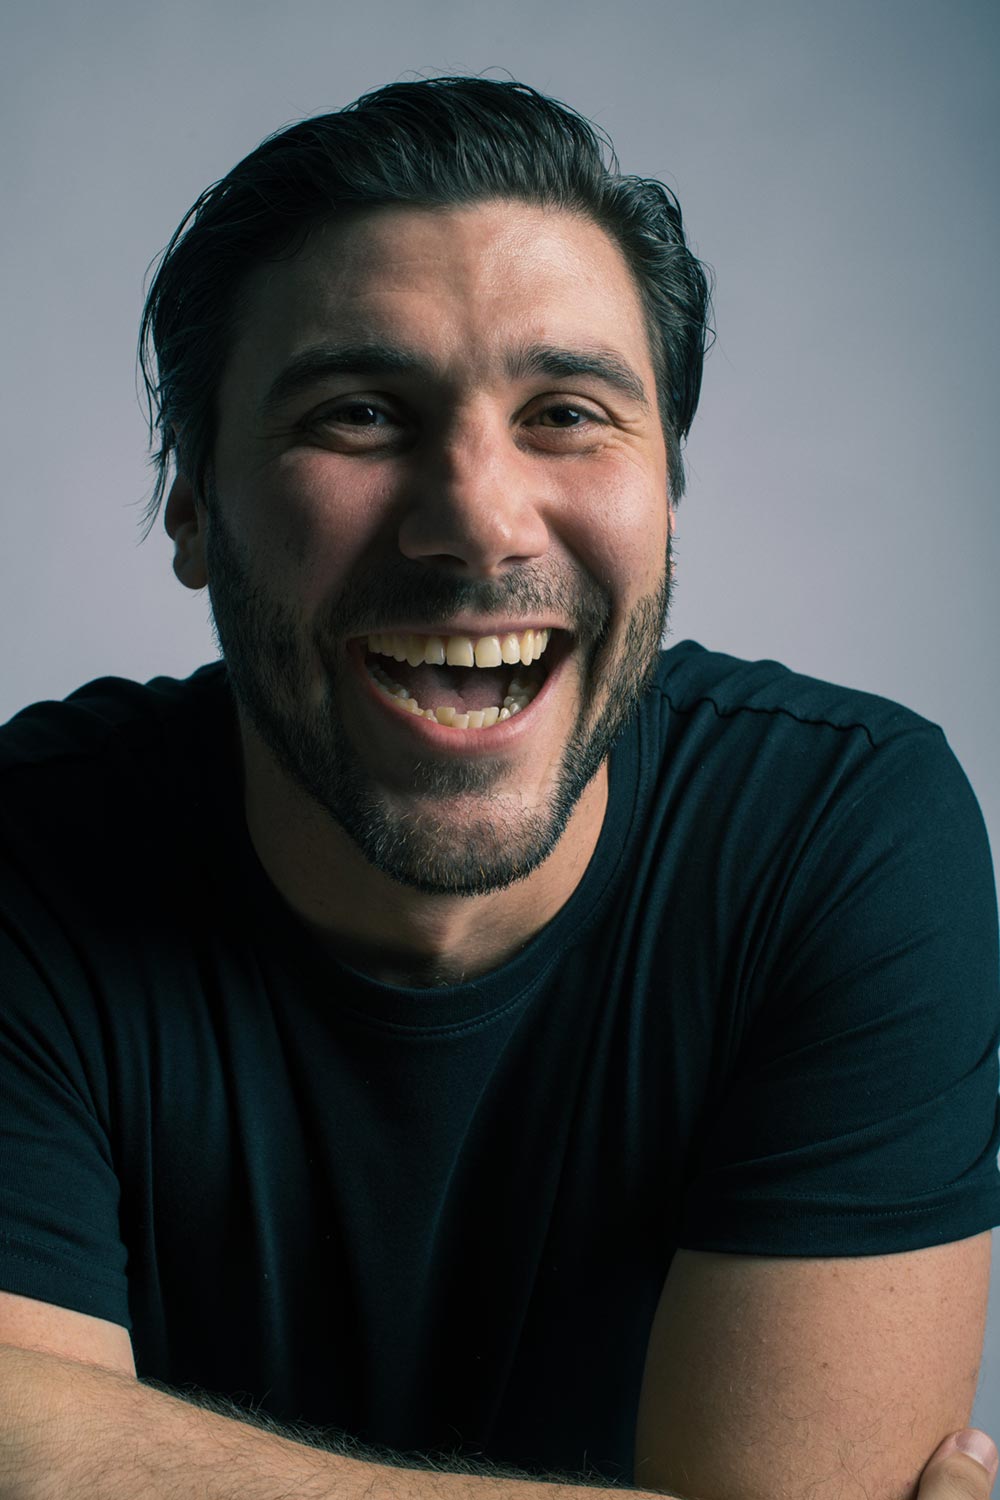 Headshot of a man wearing a black t-shirt, he is looking towards the camera laughing